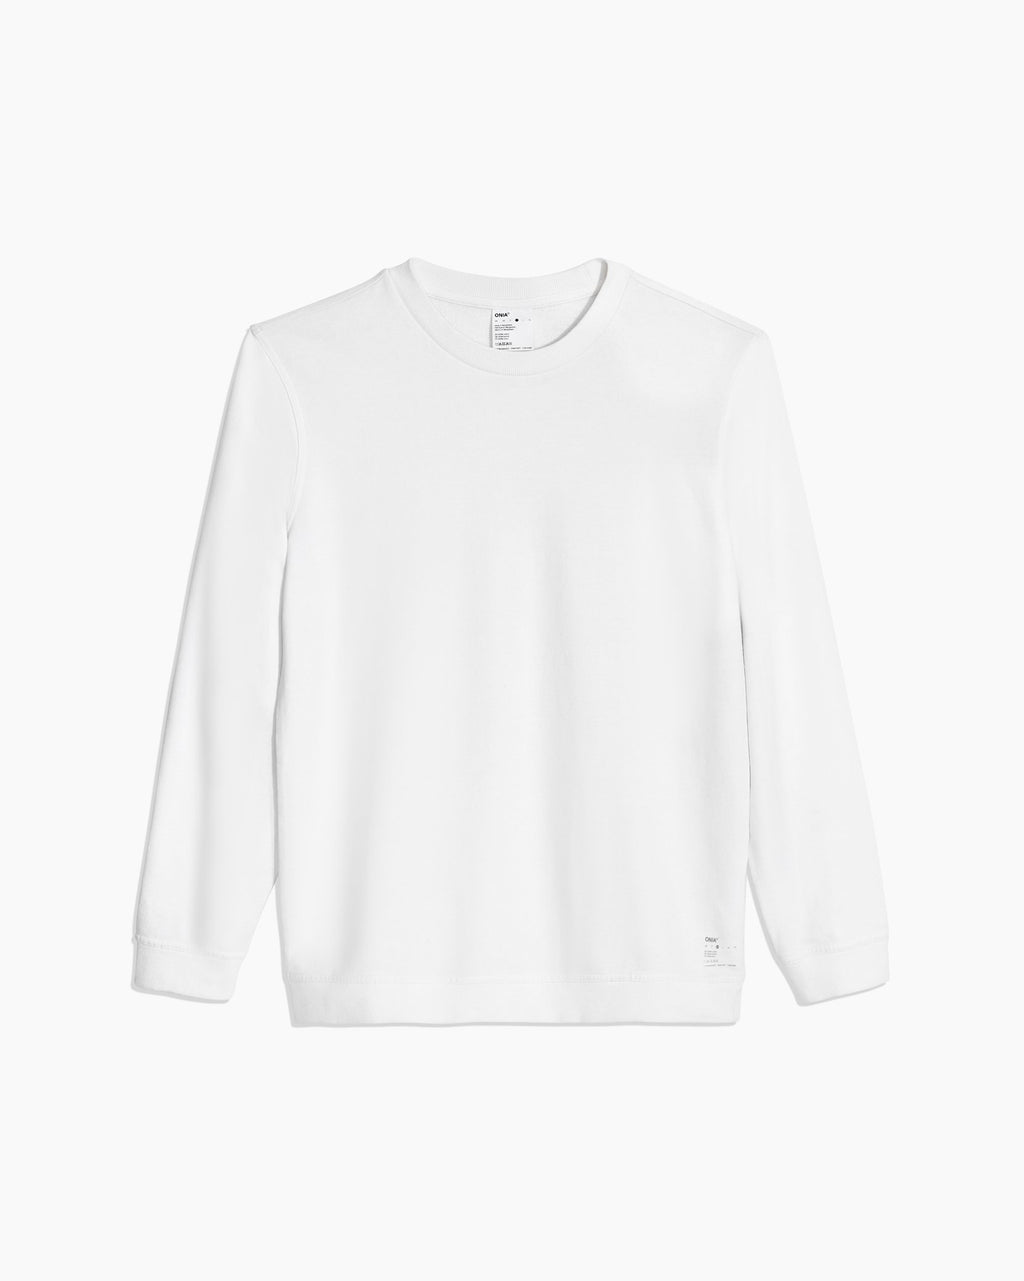 Garment Dyed French Terry Crewneck Sweatshirt in White